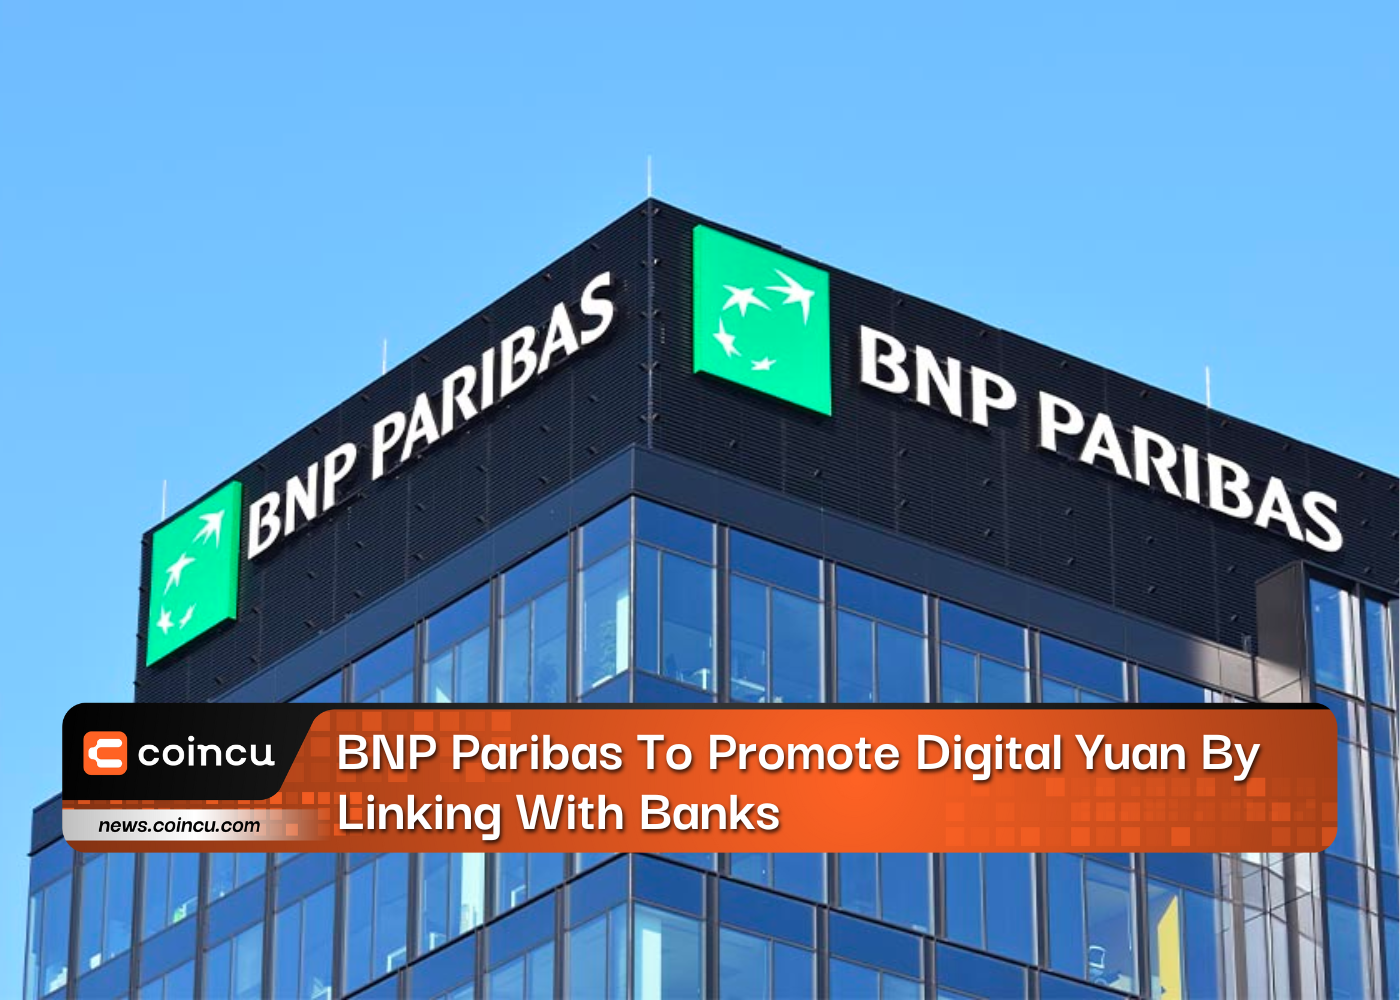 BNP Paribas To Promote Digital Yuan By Linking With Banks